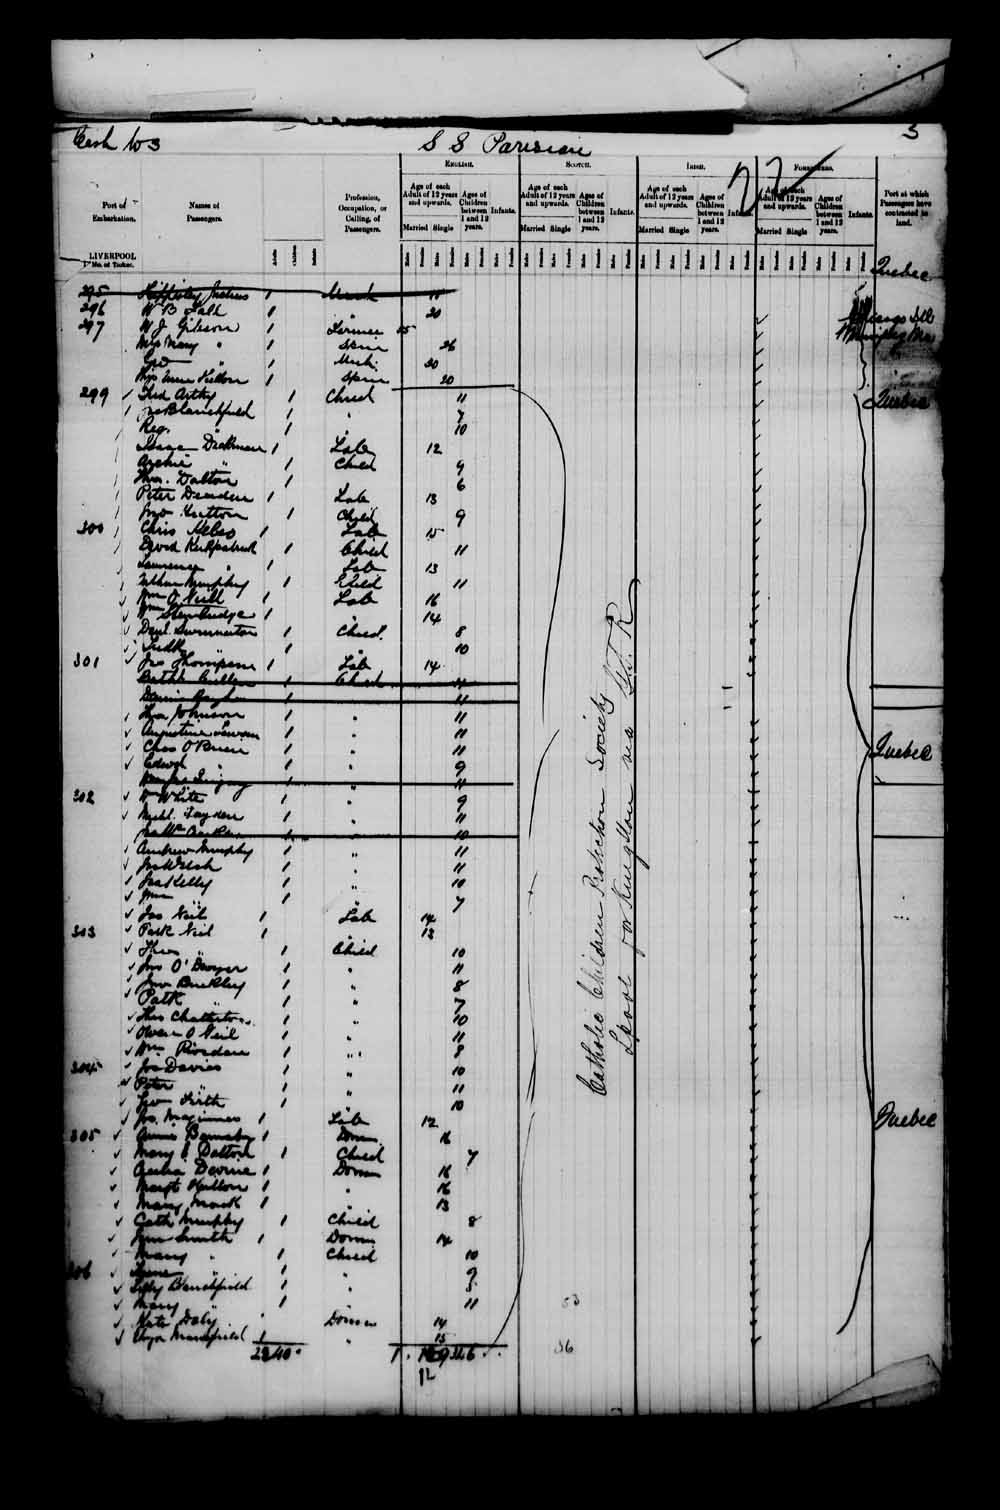 Digitized page of Passenger Lists for Image No.: e003549678